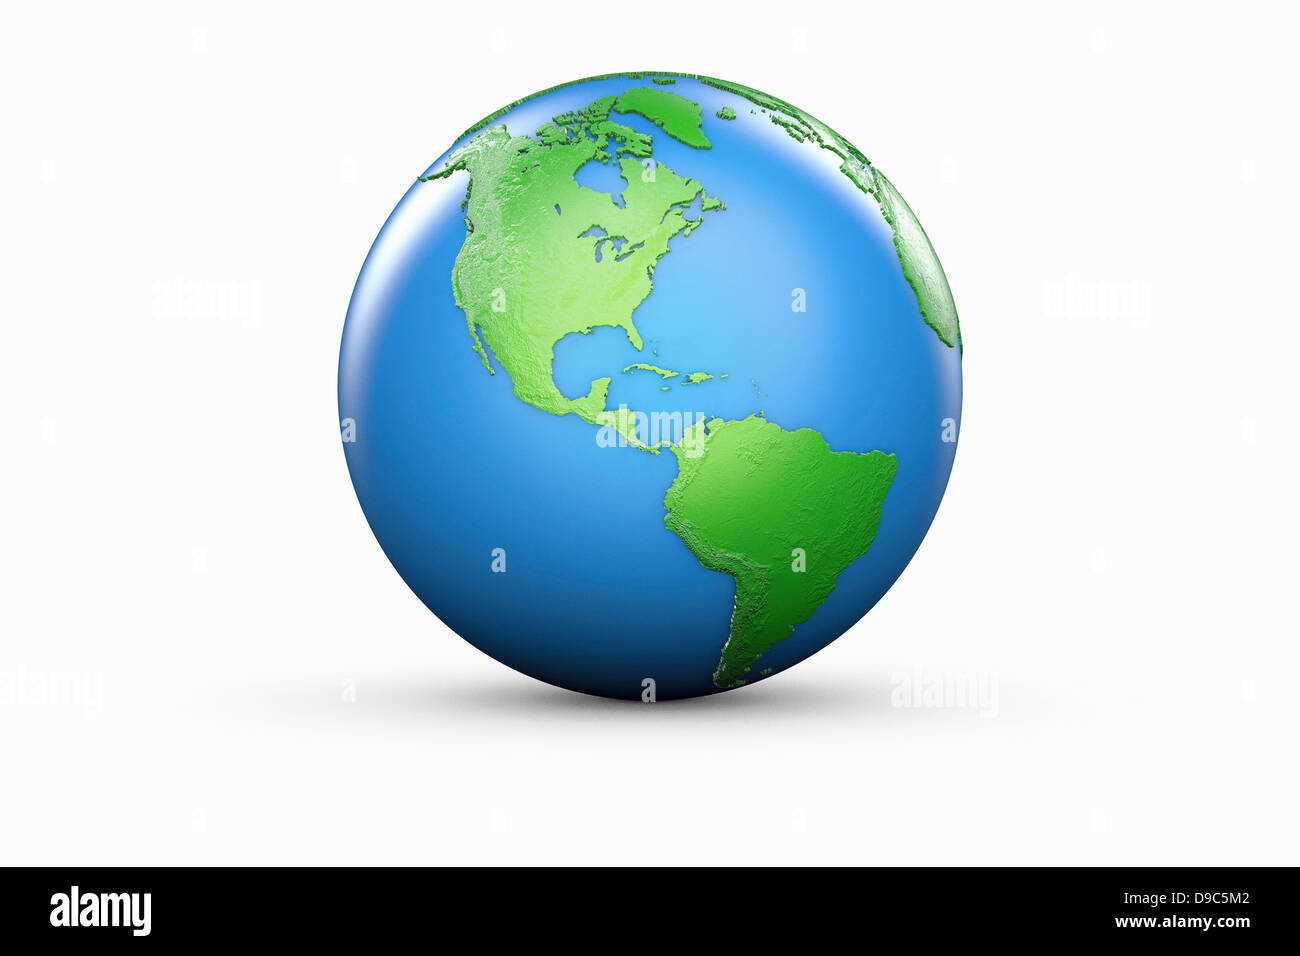 Blue and green globe of North and South America Stock Photo